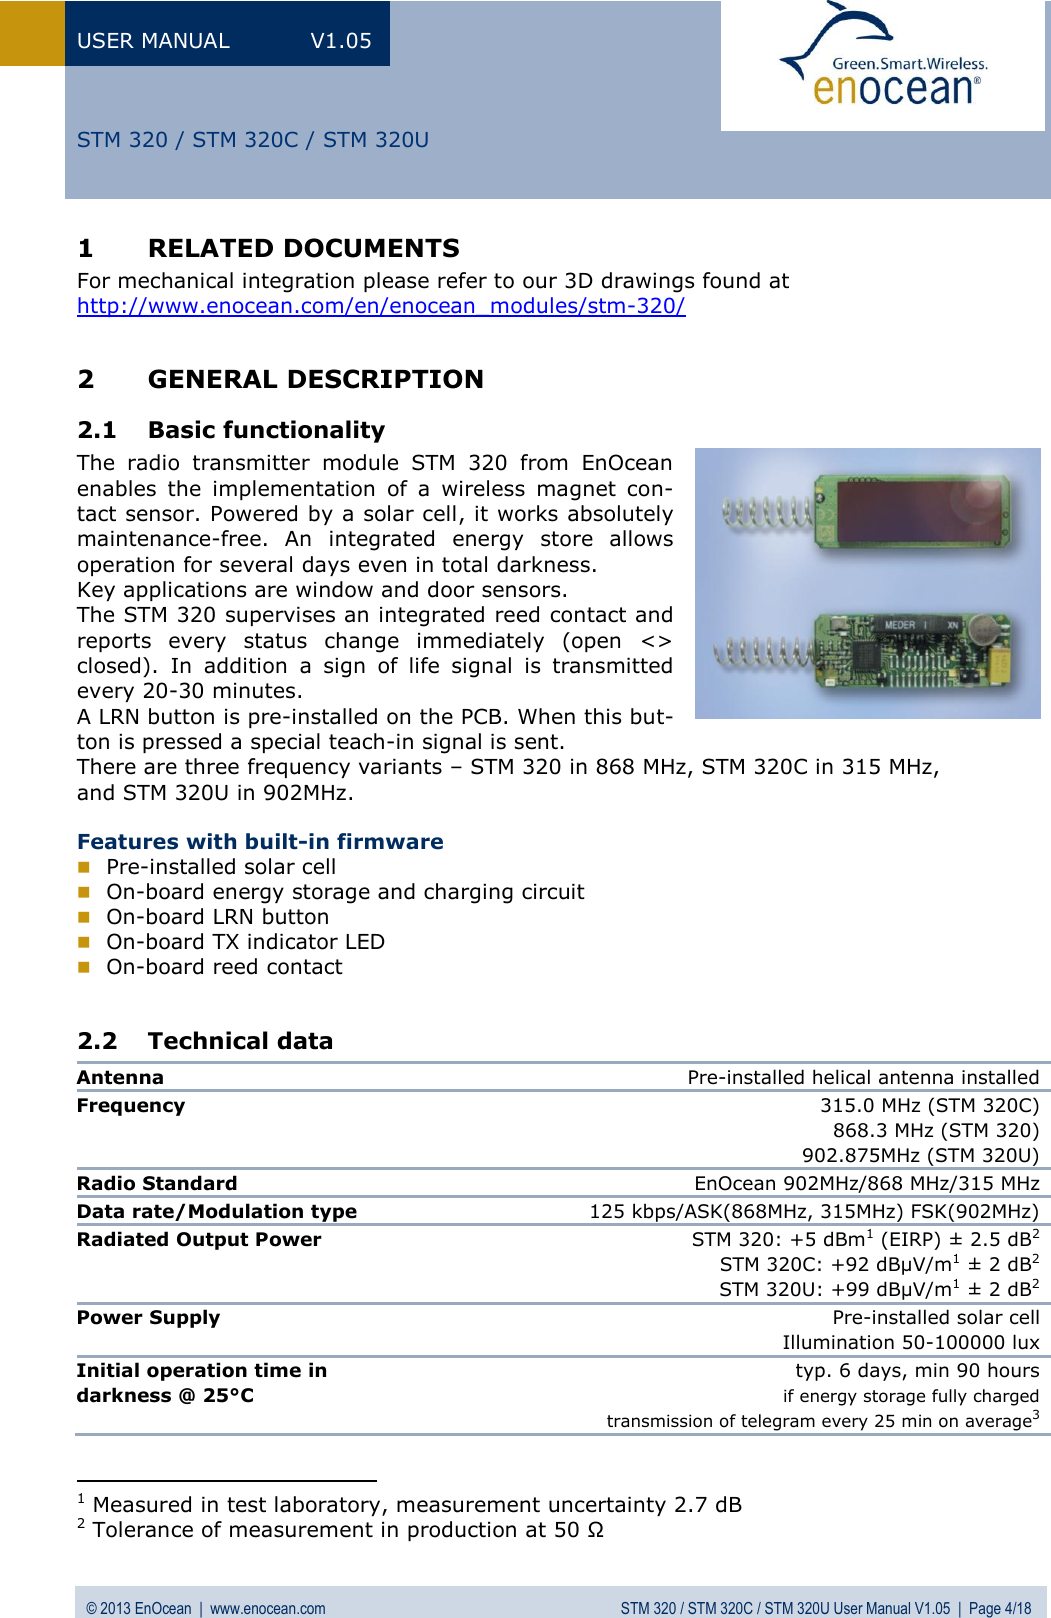 USER MANUAL  V1.05 © 2013 EnOcean  |  www.enocean.com  STM 320 / STM 320C / STM 320U User Manual V1.05  |  Page 4/18   STM 320 / STM 320C / STM 320U 1 RELATED DOCUMENTS For mechanical integration please refer to our 3D drawings found at http://www.enocean.com/en/enocean_modules/stm-320/  2 GENERAL DESCRIPTION 2.1 Basic functionality The  radio  transmitter  module  STM  320  from  EnOcean enables  the  implementation  of  a  wireless  magnet  con-tact sensor. Powered by a solar cell, it works absolutely maintenance-free.  An  integrated  energy  store  allows operation for several days even in total darkness.  Key applications are window and door sensors.  The STM 320 supervises an integrated reed contact and reports  every  status  change  immediately  (open  &lt;&gt; closed).  In  addition  a  sign  of  life  signal  is  transmitted every 20-30 minutes.  A LRN button is pre-installed on the PCB. When this but-ton is pressed a special teach-in signal is sent. There are three frequency variants – STM 320 in 868 MHz, STM 320C in 315 MHz,  and STM 320U in 902MHz.  Features with built-in firmware  Pre-installed solar cell   On-board energy storage and charging circuit  On-board LRN button   On-board TX indicator LED  On-board reed contact  2.2 Technical data Antenna Pre-installed helical antenna installed  Frequency  315.0 MHz (STM 320C) 868.3 MHz (STM 320) 902.875MHz (STM 320U) Radio Standard  EnOcean 902MHz/868 MHz/315 MHz Data rate/Modulation type 125 kbps/ASK(868MHz, 315MHz) FSK(902MHz) Radiated Output Power STM 320: +5 dBm1 (EIRP) ± 2.5 dB2 STM 320C: +92 dBµV/m1 ± 2 dB2 STM 320U: +99 dBµV/m1 ± 2 dB2 Power Supply Pre-installed solar cell Illumination 50-100000 lux Initial operation time in  darkness @ 25°C  typ. 6 days, min 90 hours if energy storage fully charged  transmission of telegram every 25 min on average3                                            1 Measured in test laboratory, measurement uncertainty 2.7 dB 2 Tolerance of measurement in production at 50 Ω 